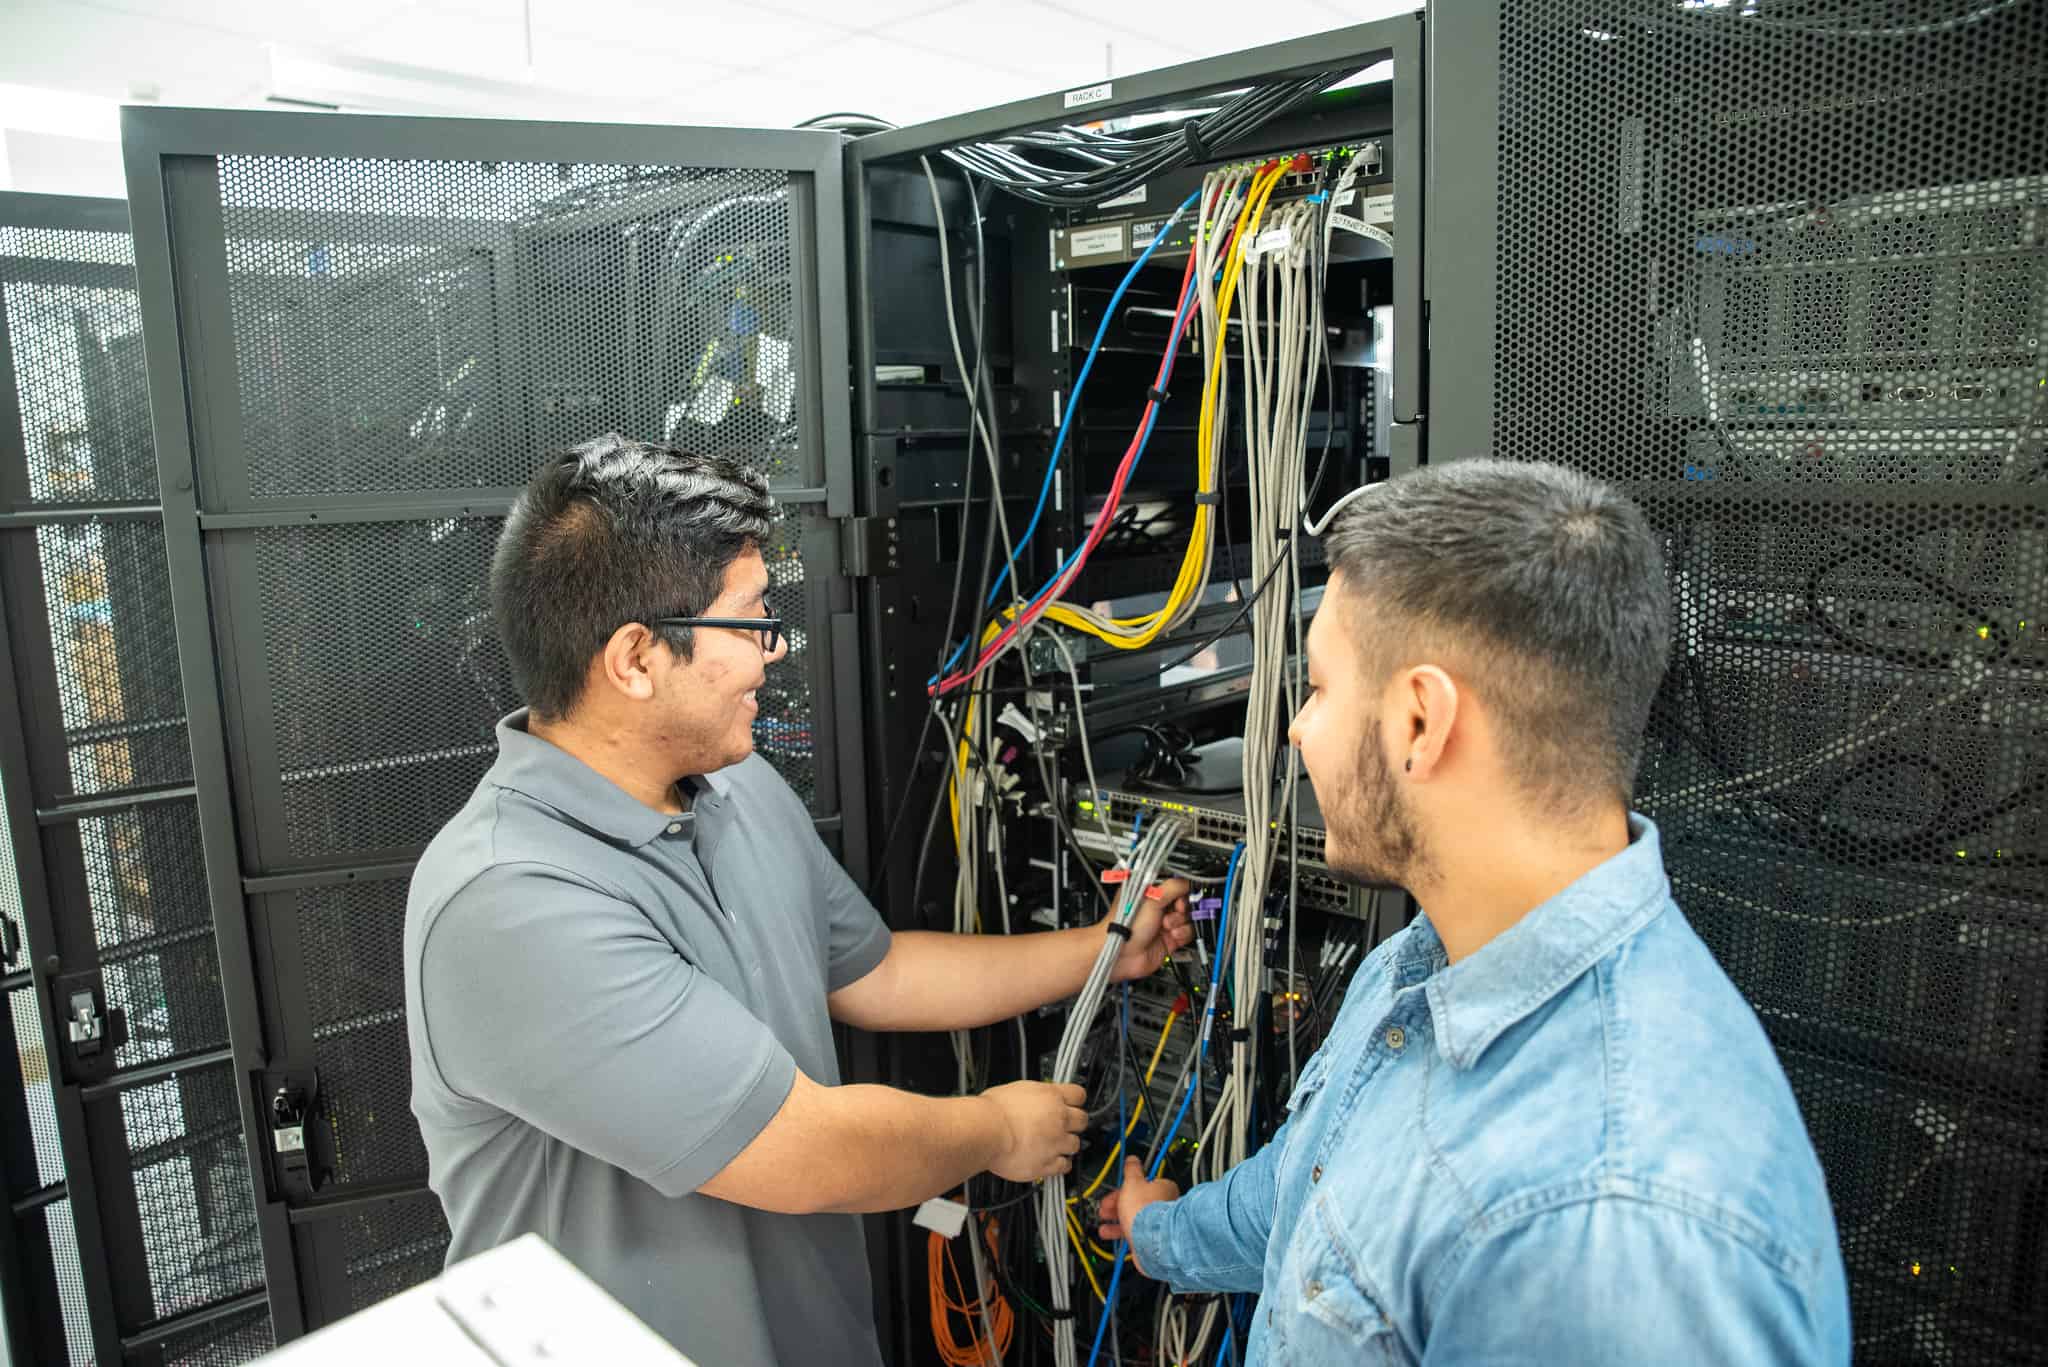 Two male P-TECH students working on network cables during their IBM internship.